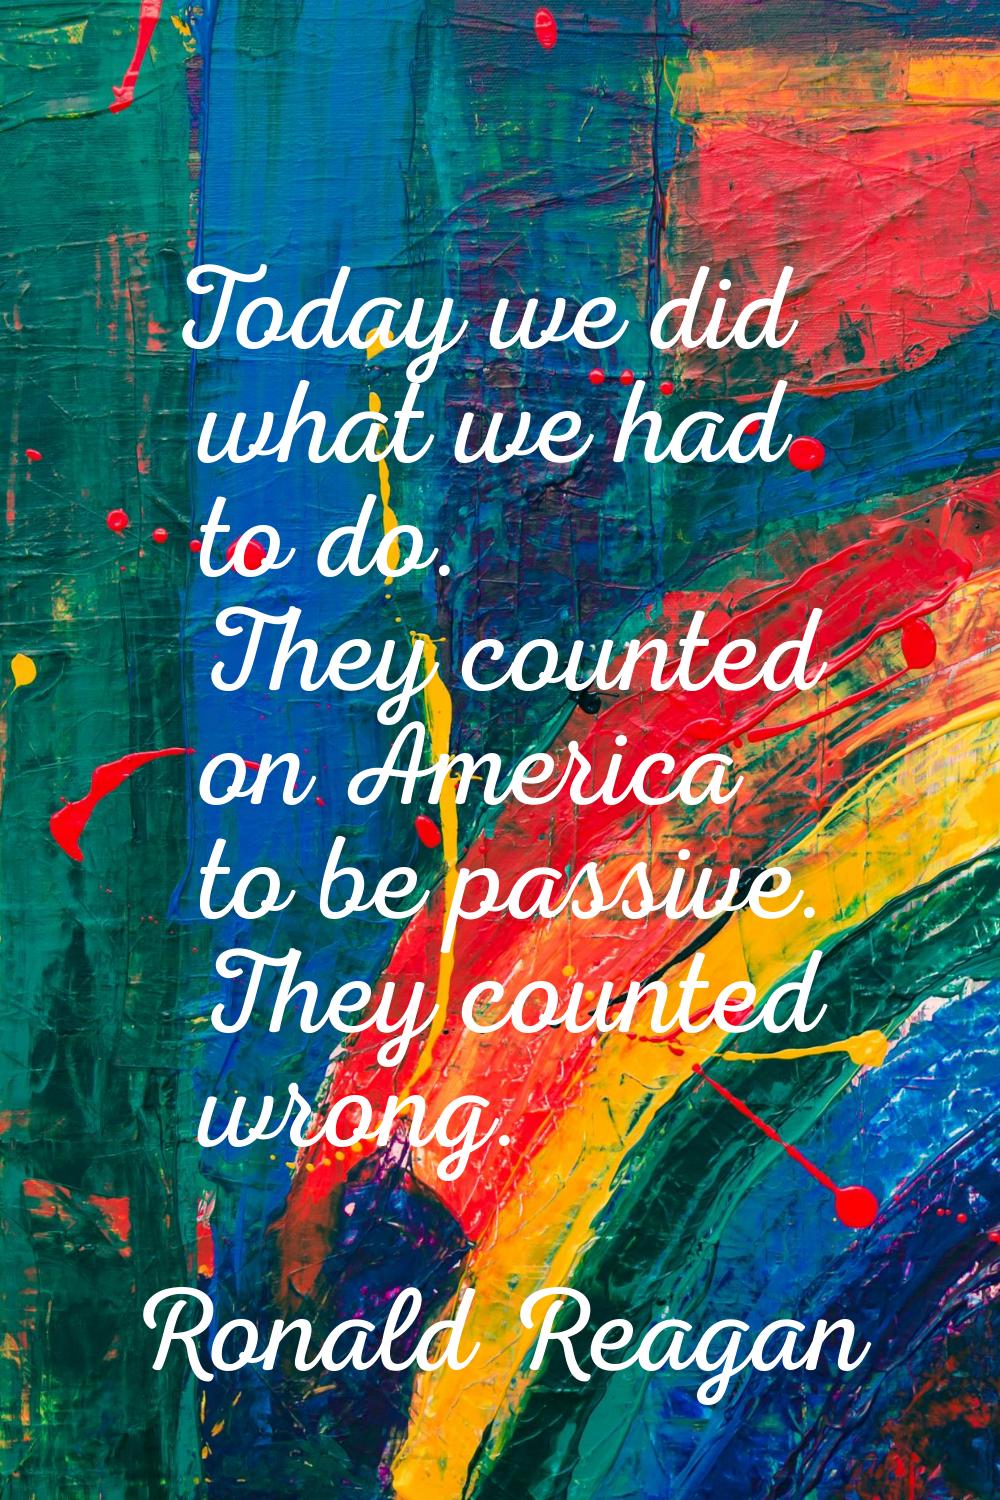 Today we did what we had to do. They counted on America to be passive. They counted wrong.